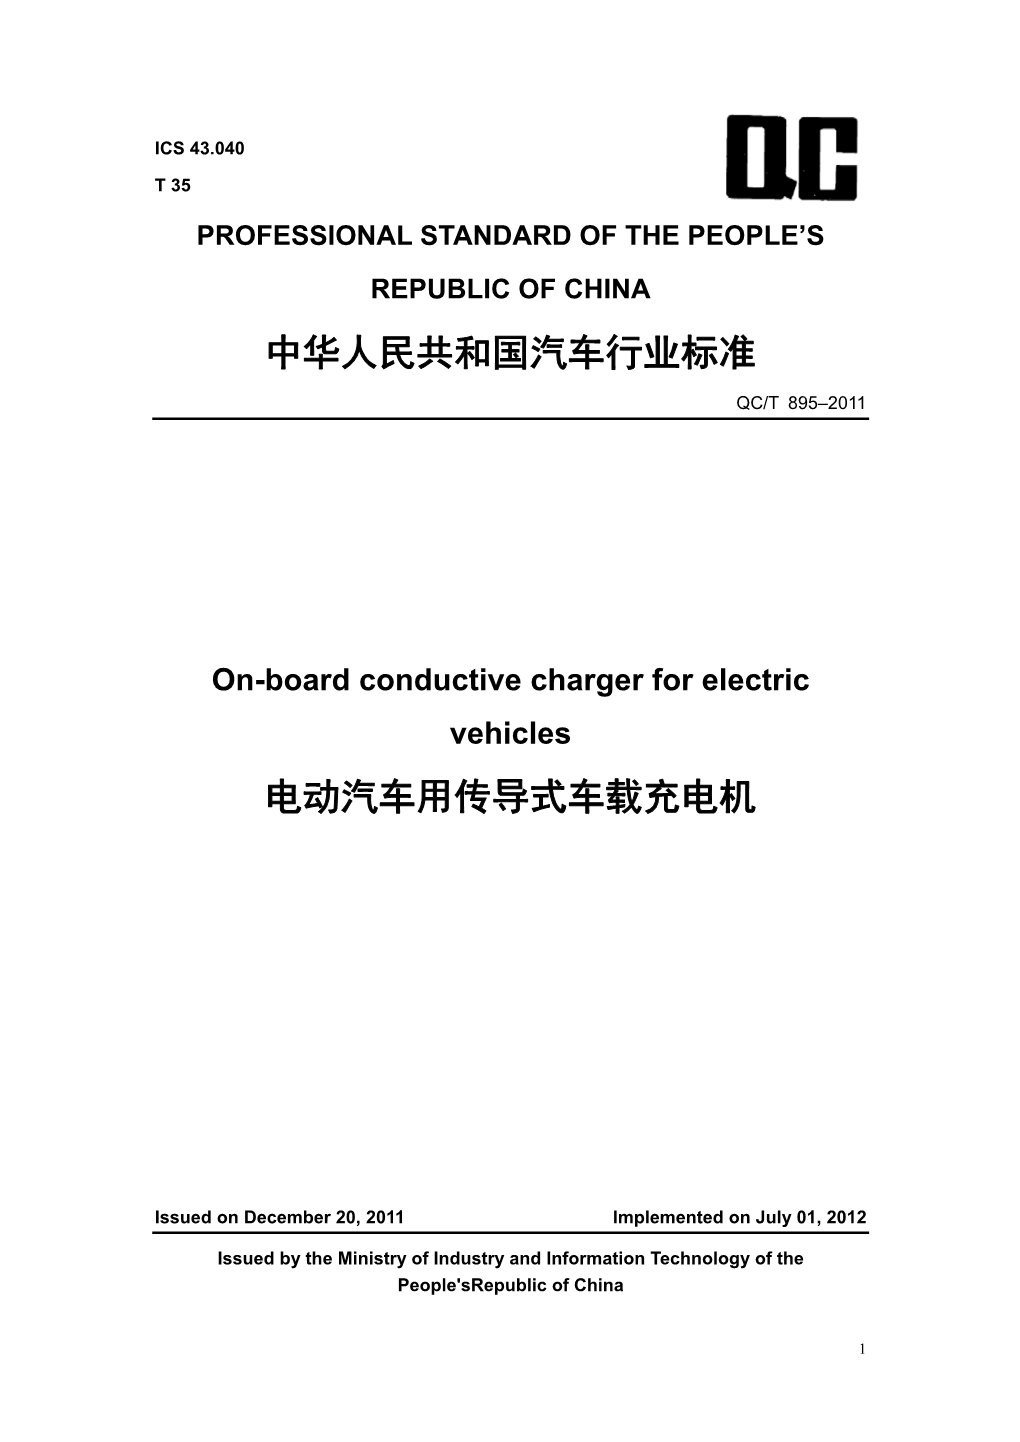 Conduction Type On-Board Charger for Electric Automobile